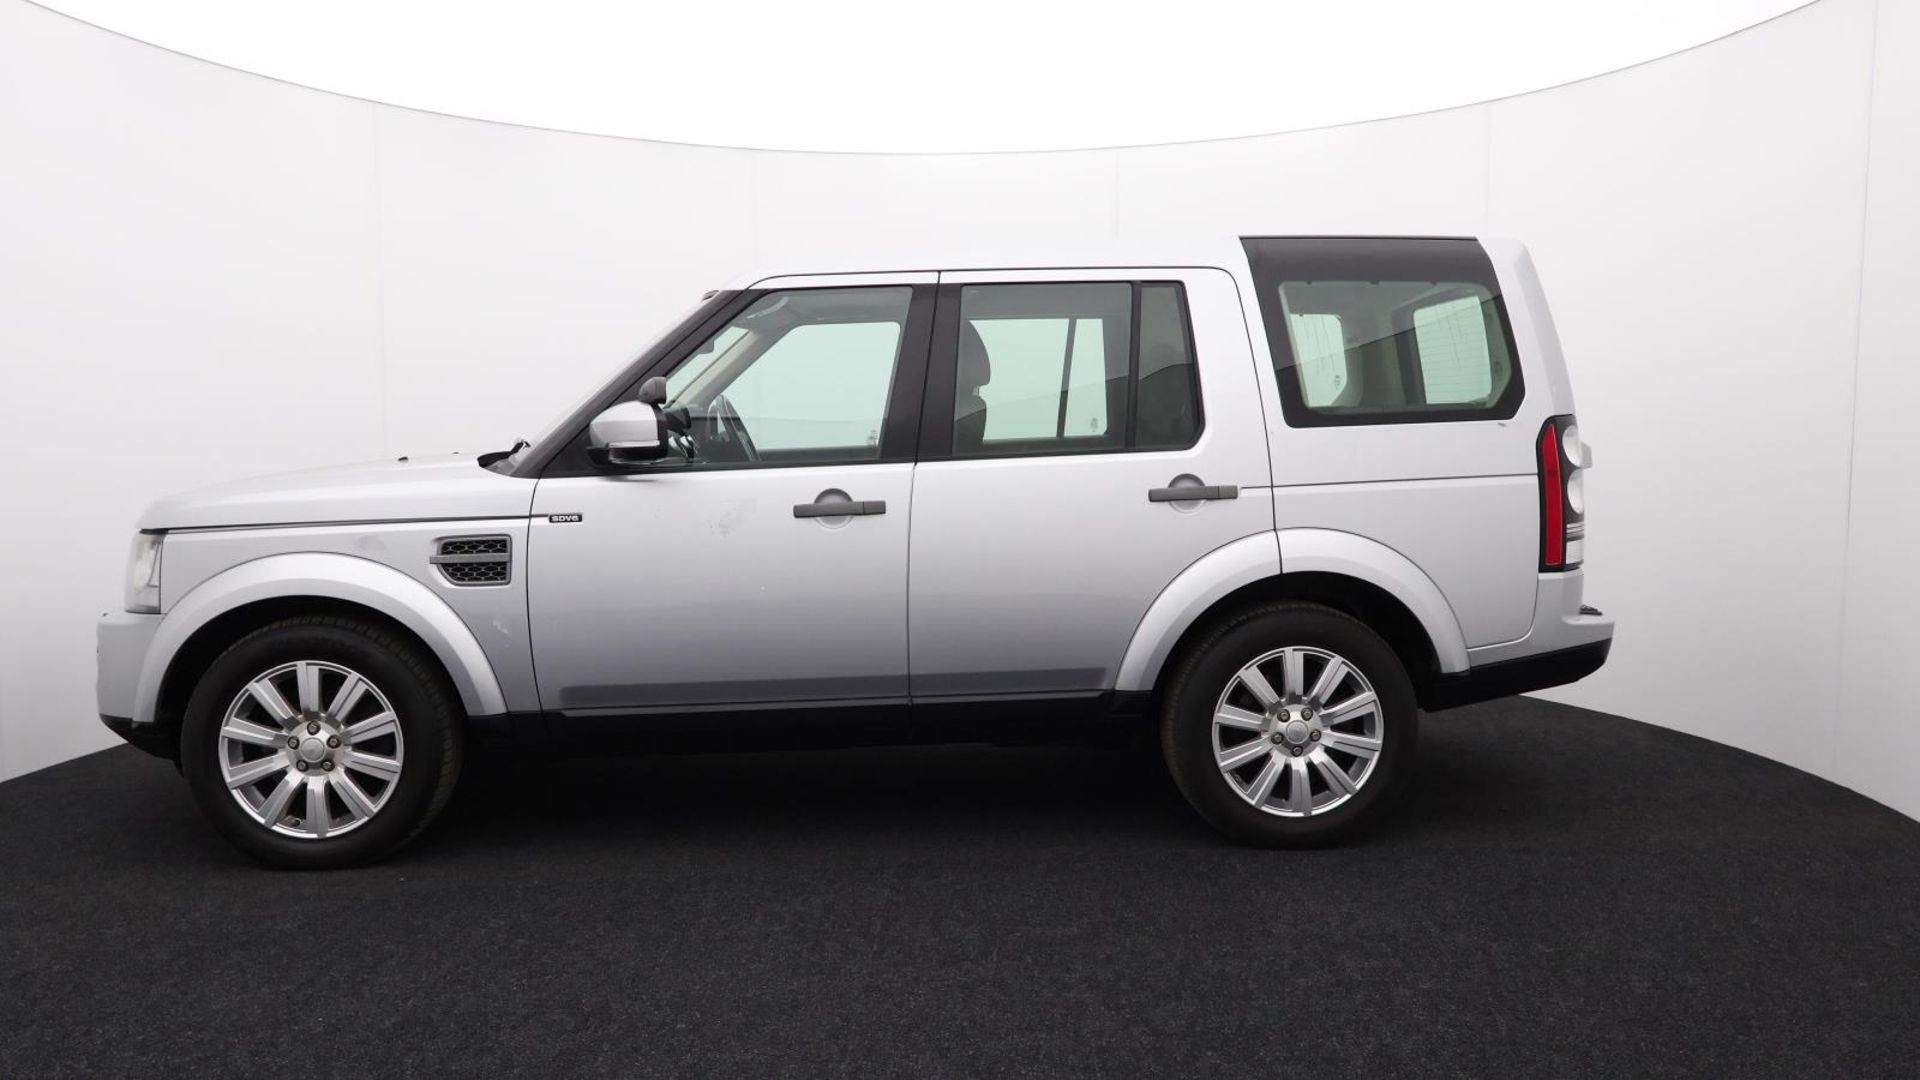 Land Rover Discovery SDV6 SE - 2015 - Automatic - Diesel - 2993cc 6 Cylinder engine - LJ15 LTE - Image 19 of 44